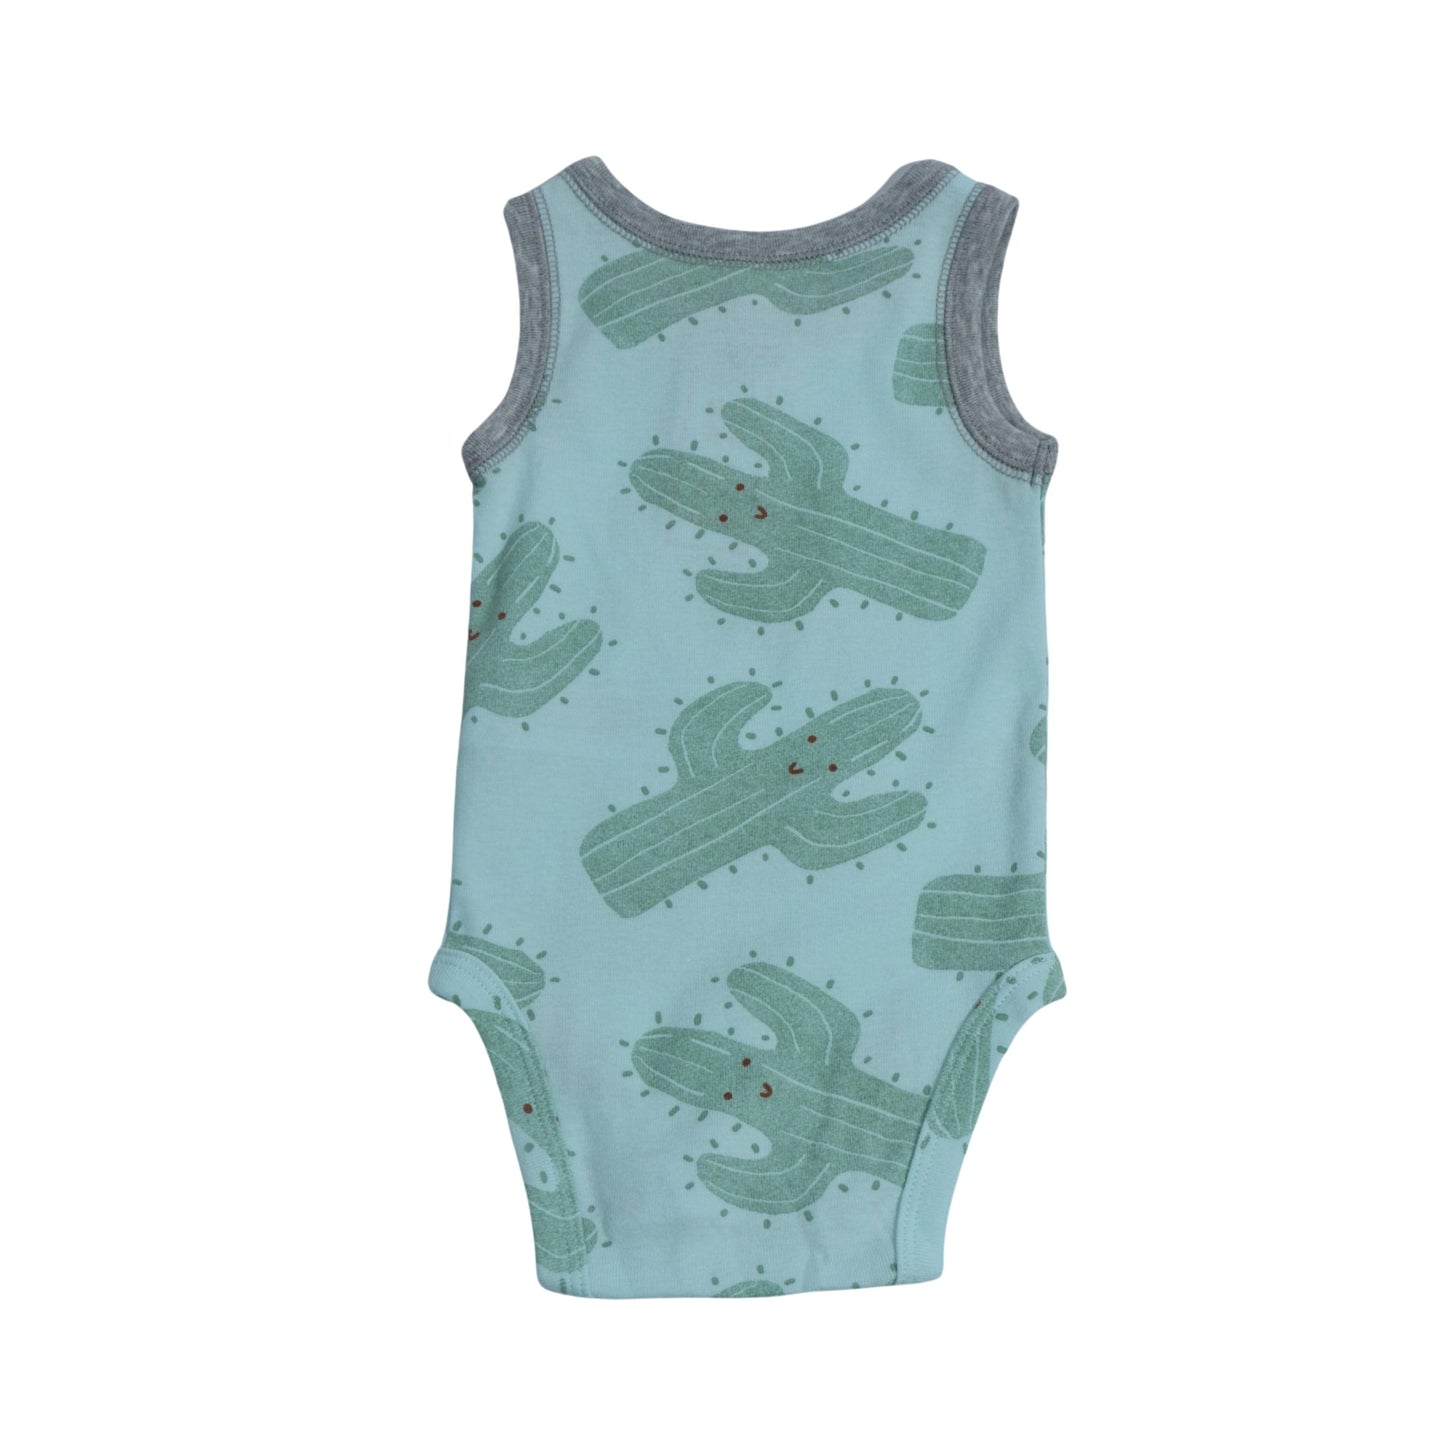 CARTER'S Baby Boy 3 Month / Multi-Color CARTER'S - BABY - Printed Bodysuit